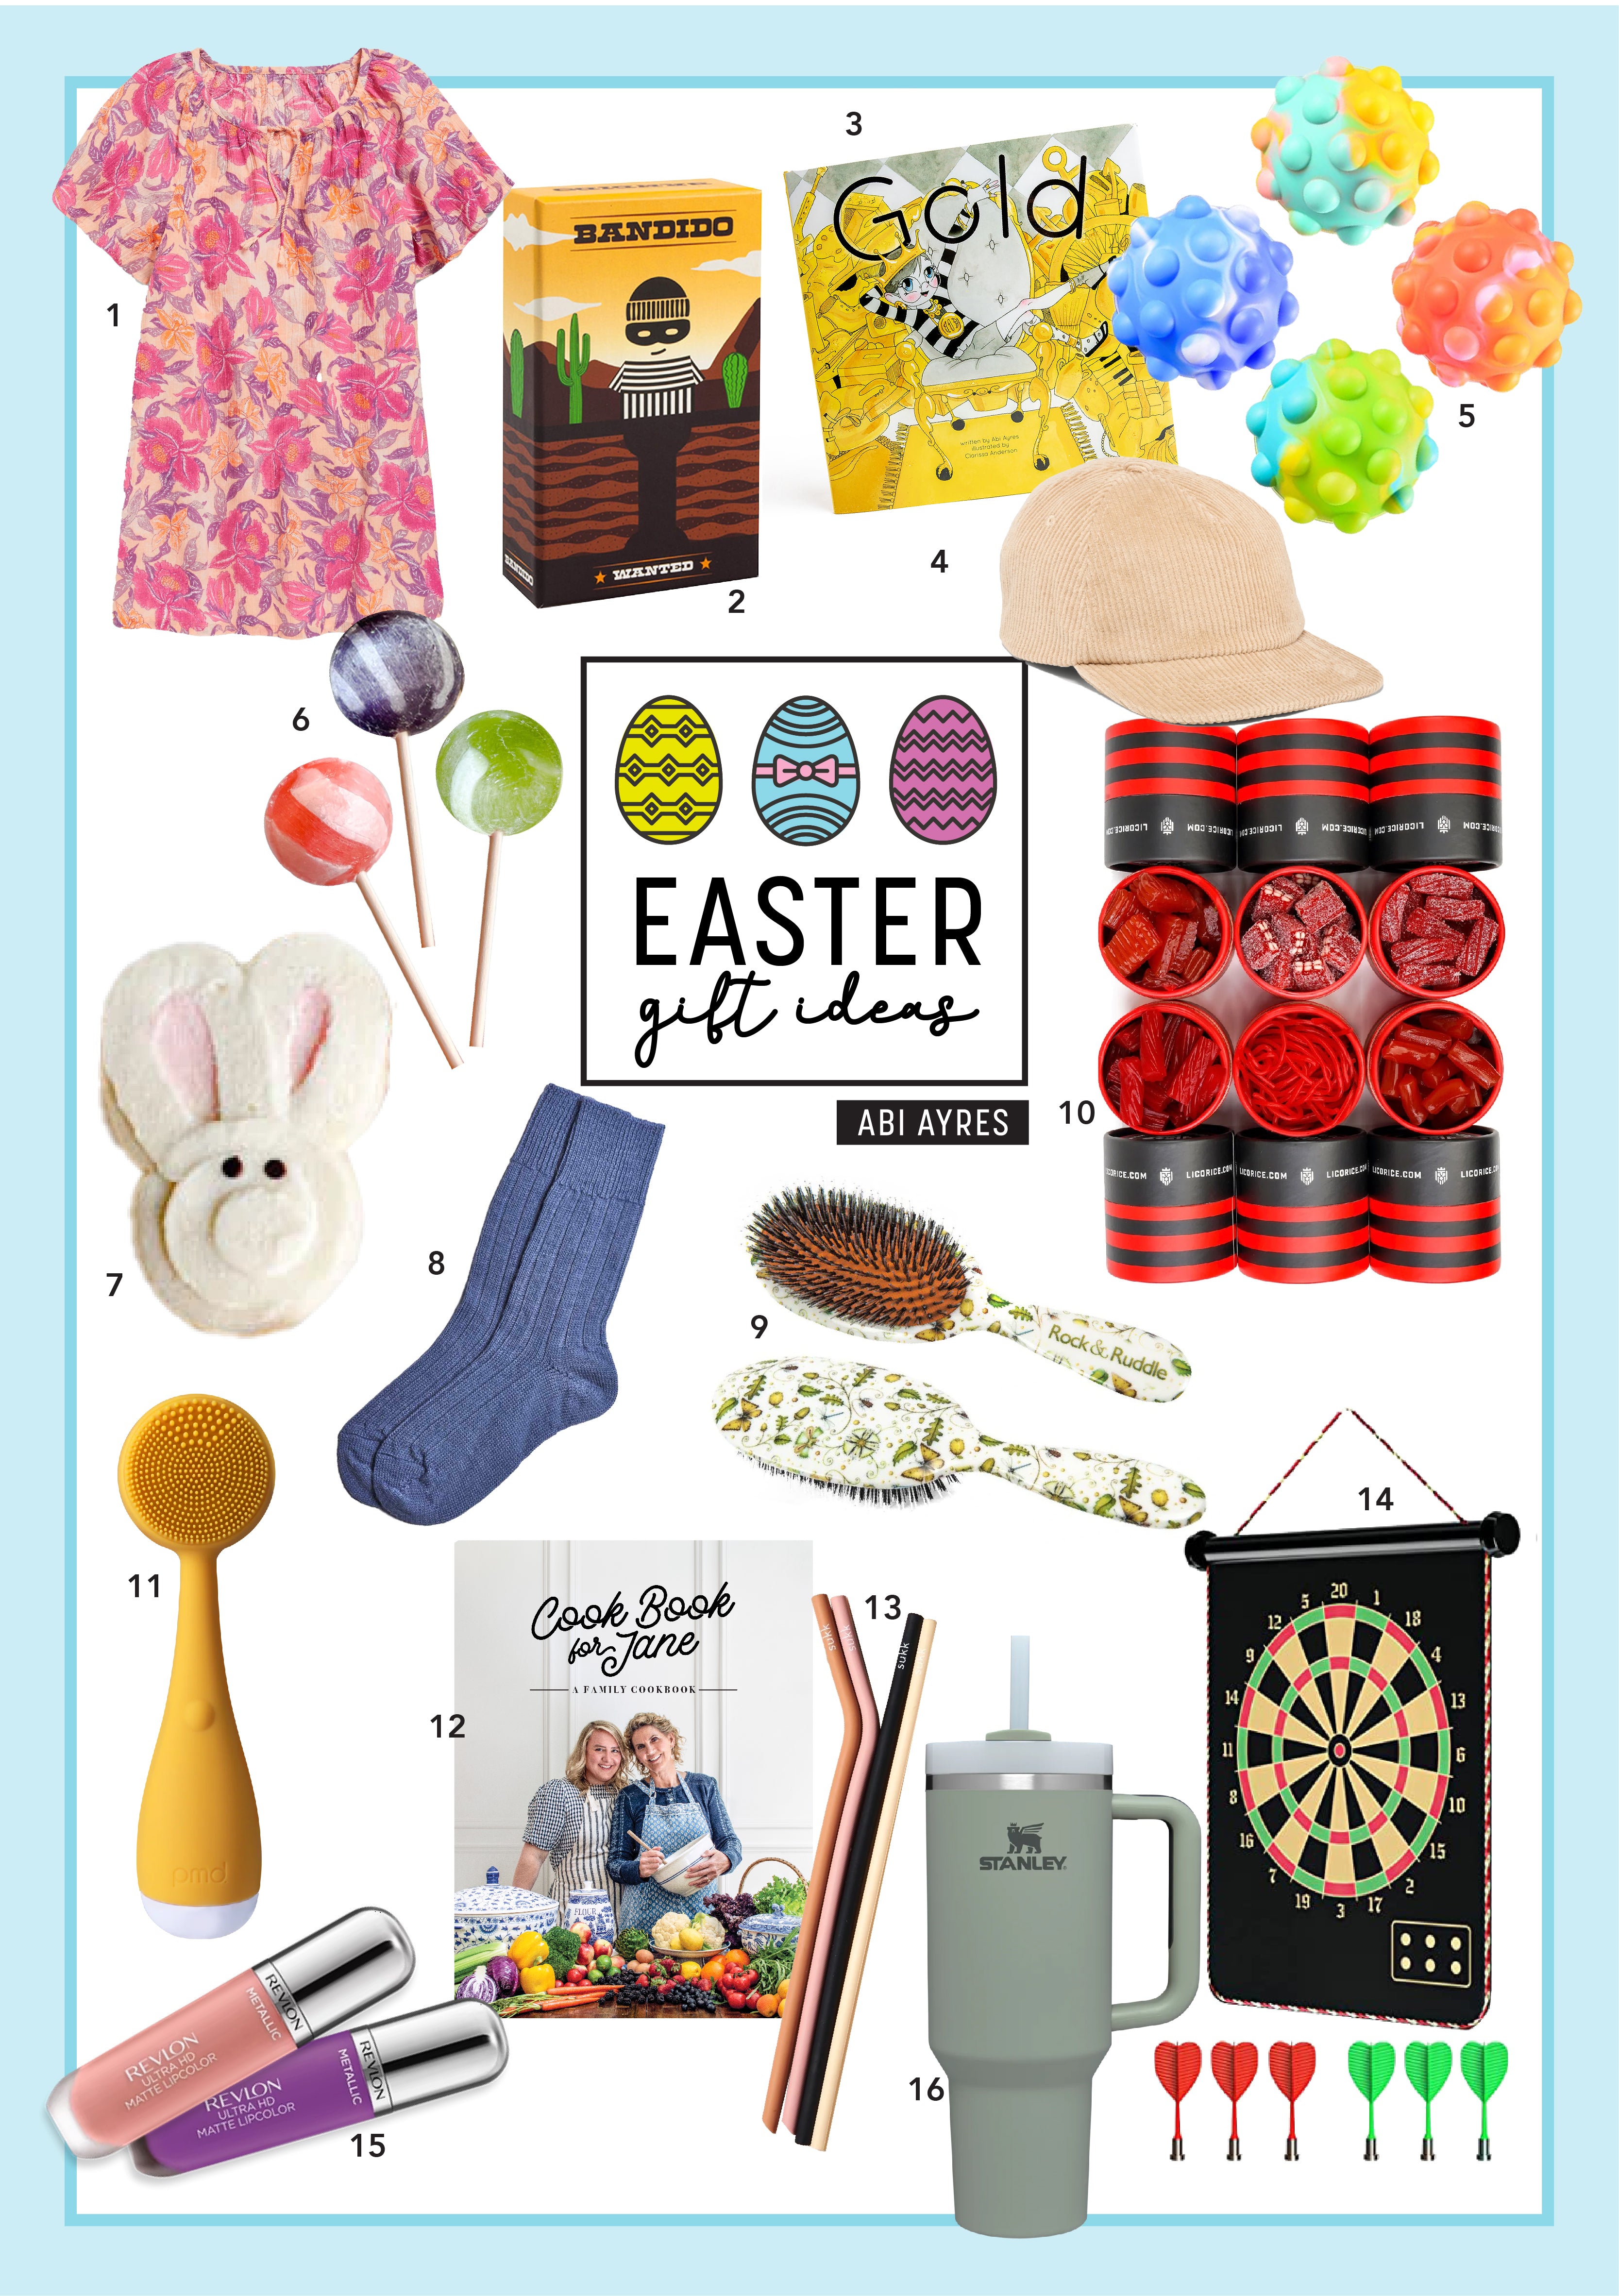 Easter Traditions and Gift Ideas